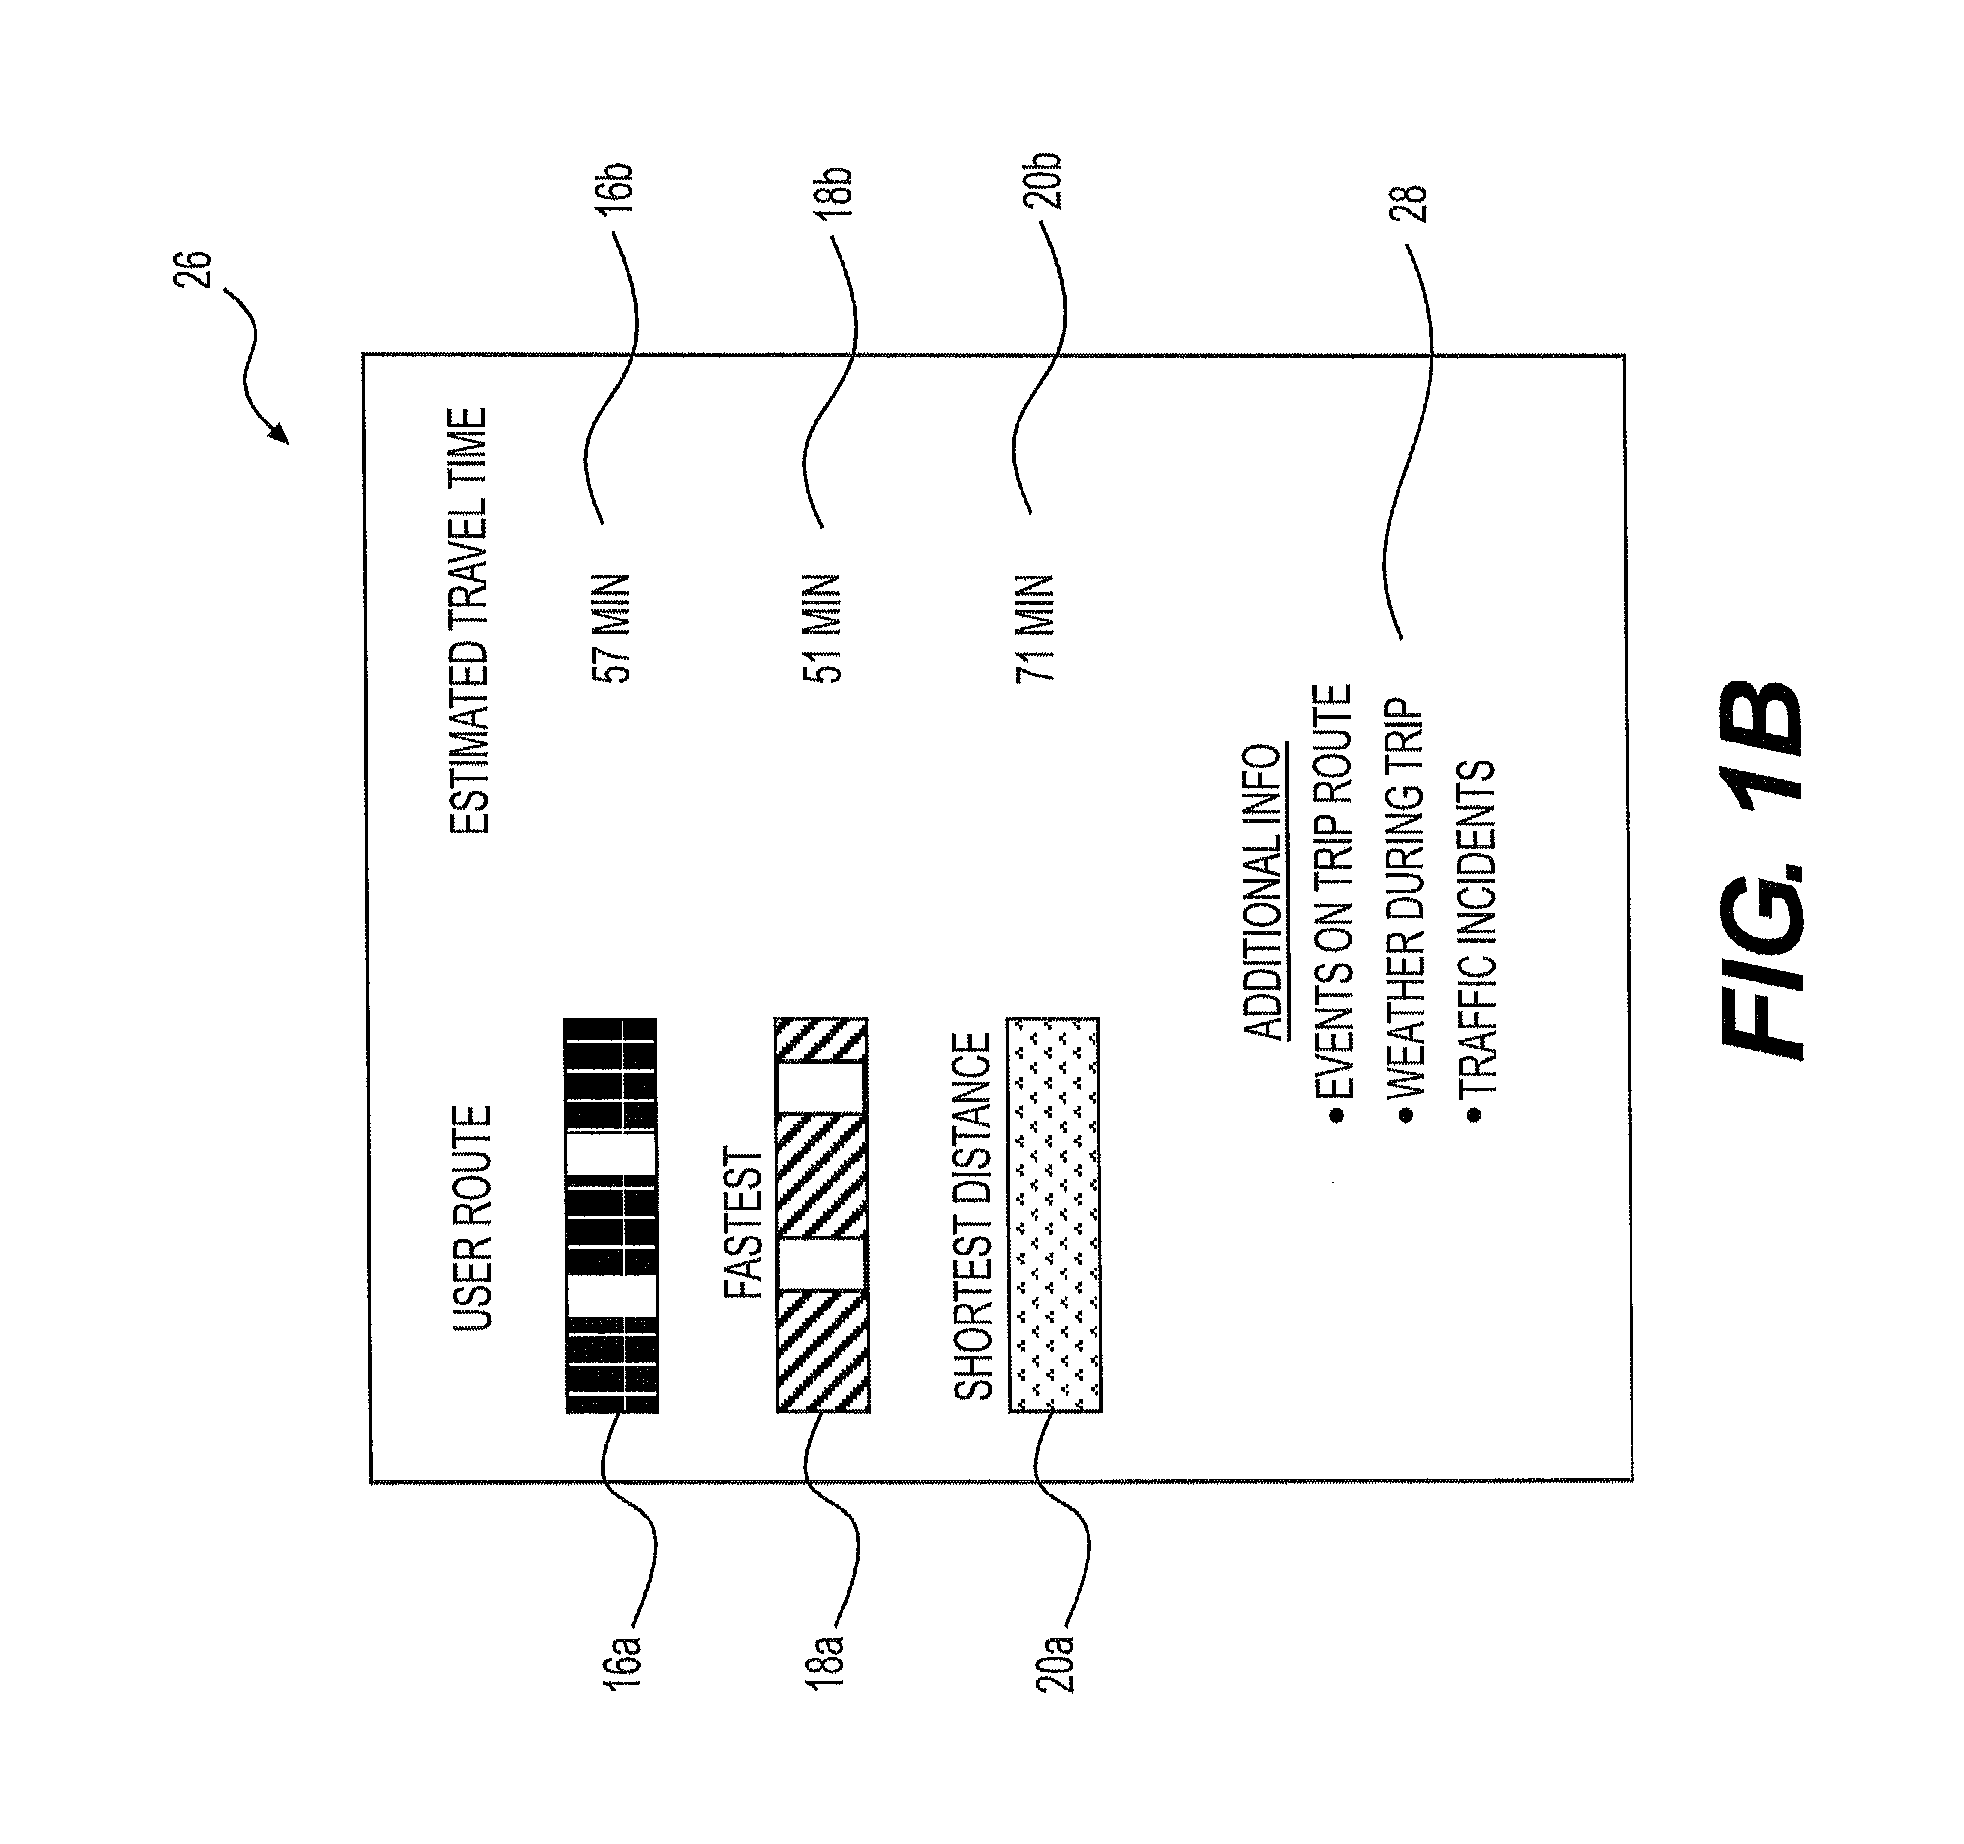 Systems and methods for providing mobile mapping services including trip prediction and route recommendation